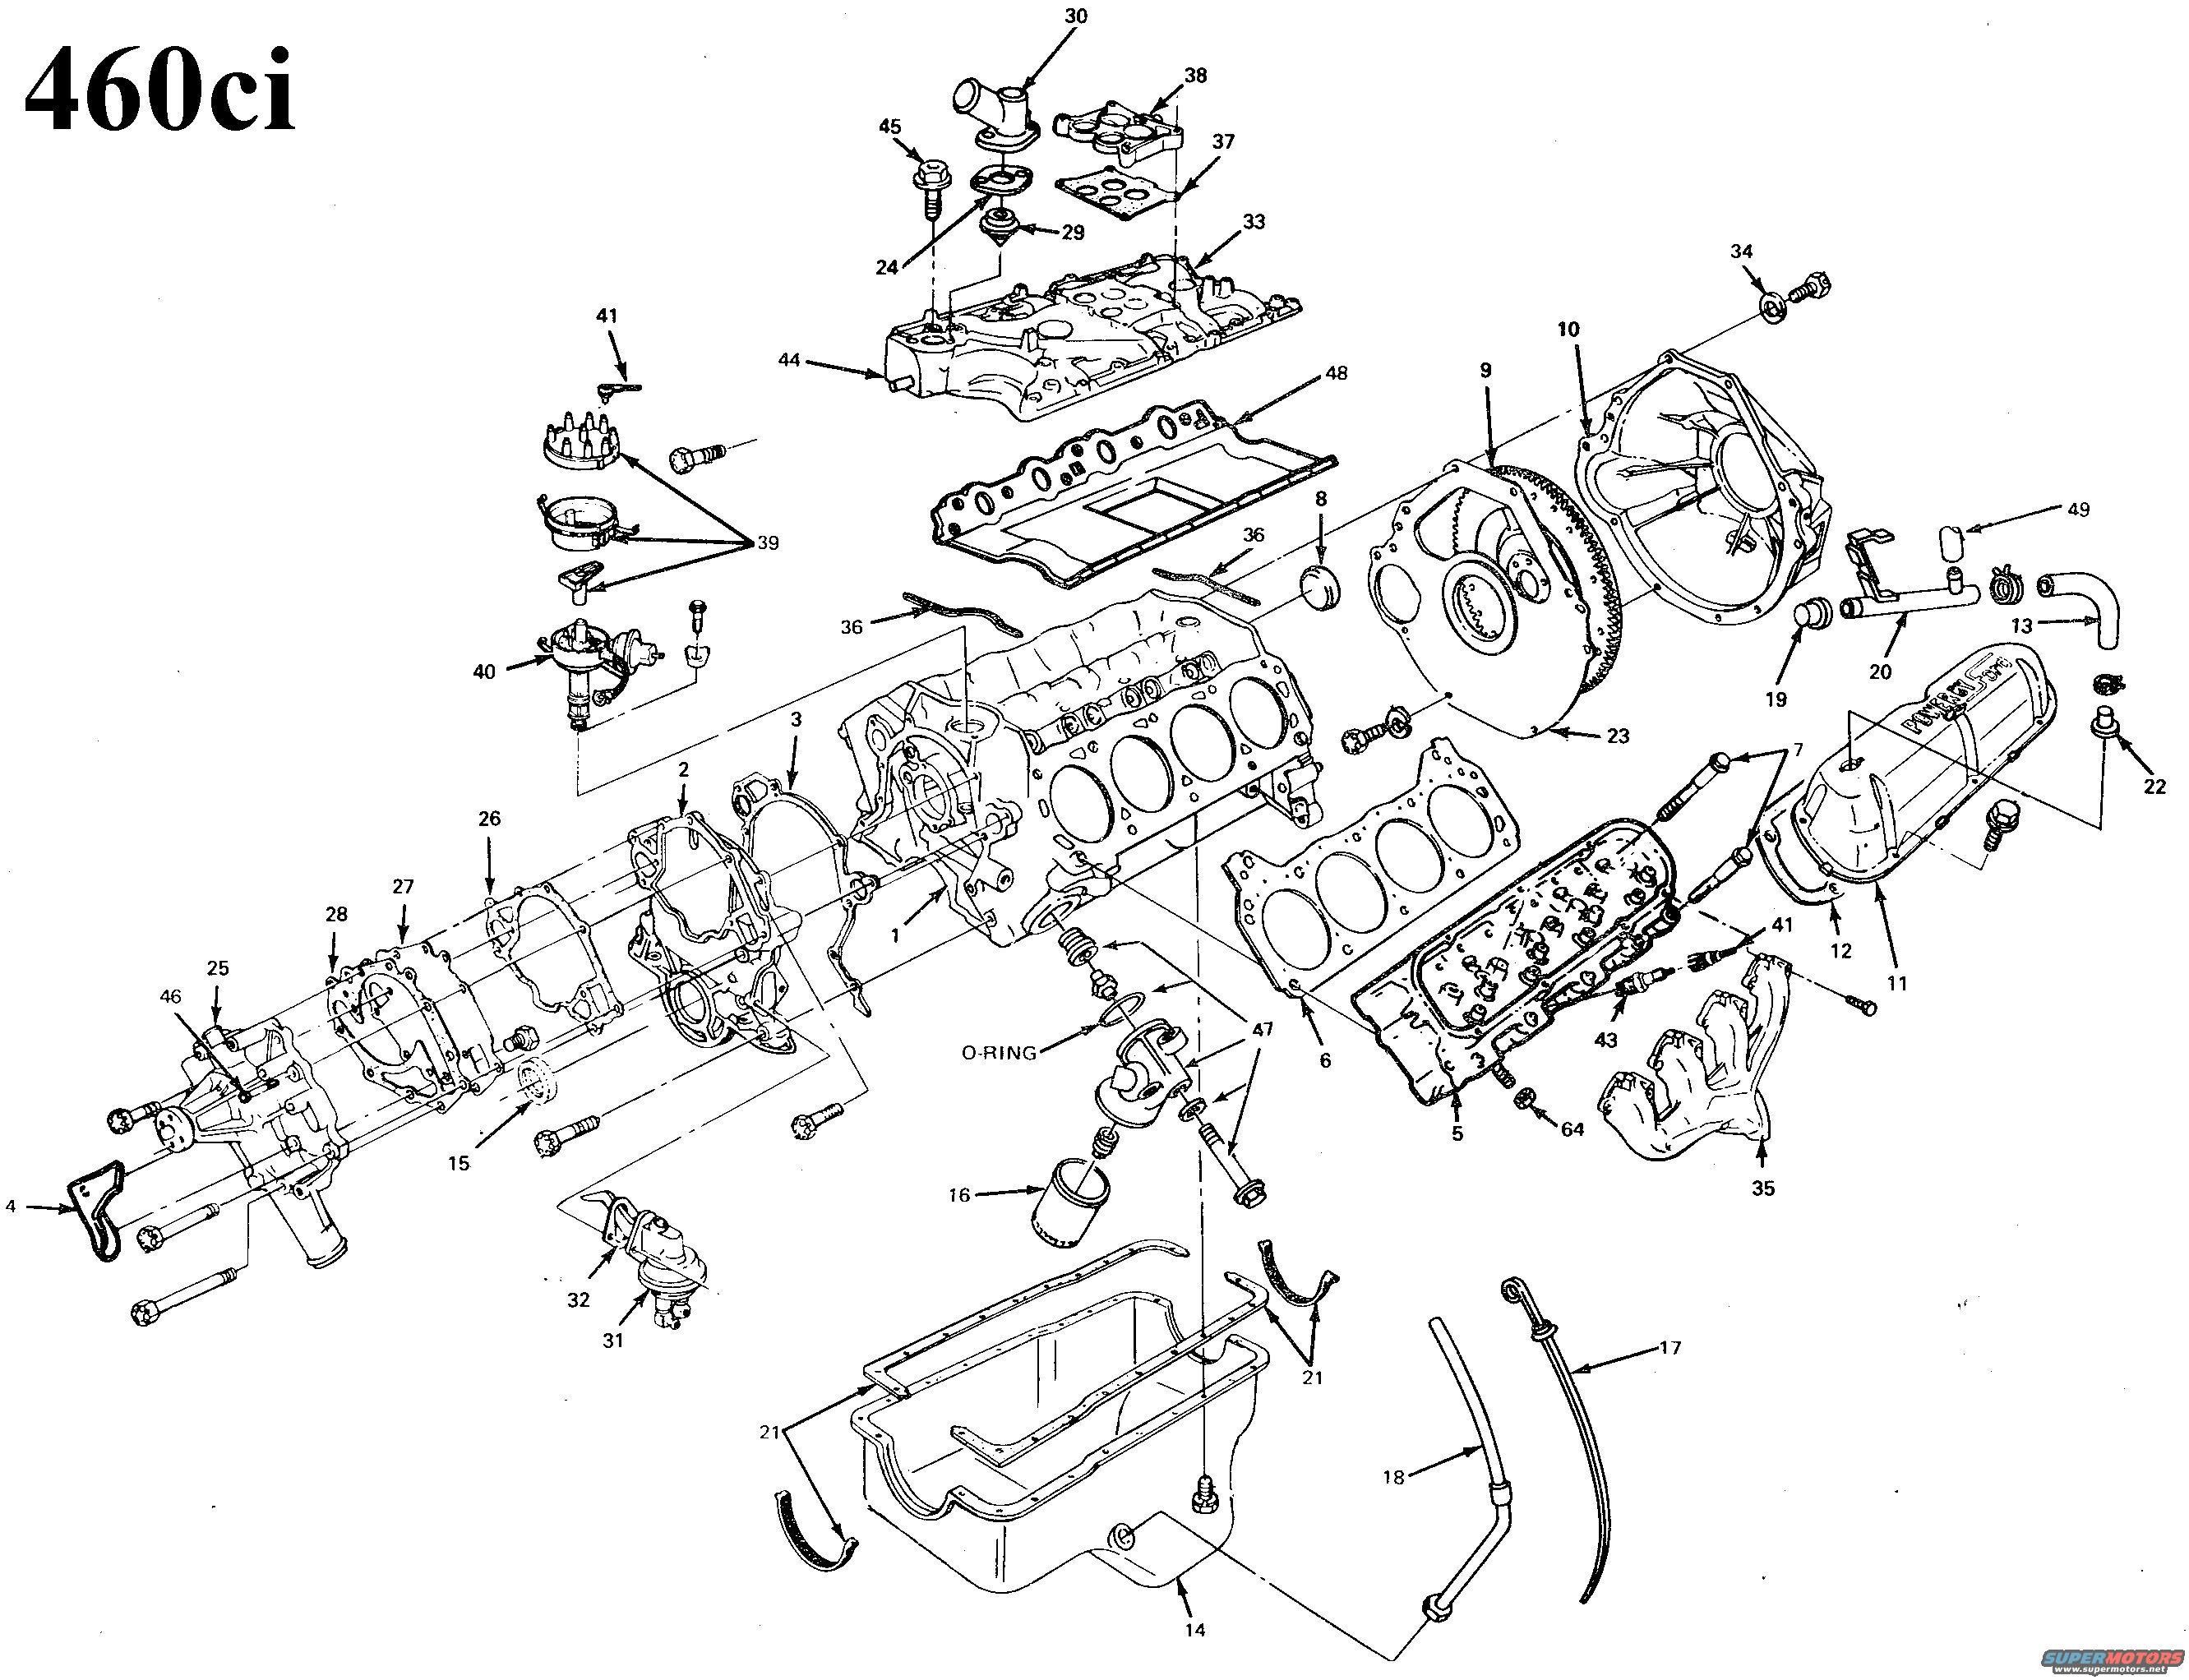 Exploded Car Diagram 460 ford Engine Exploded Diagram Wiring Diagram Used Of Exploded Car Diagram